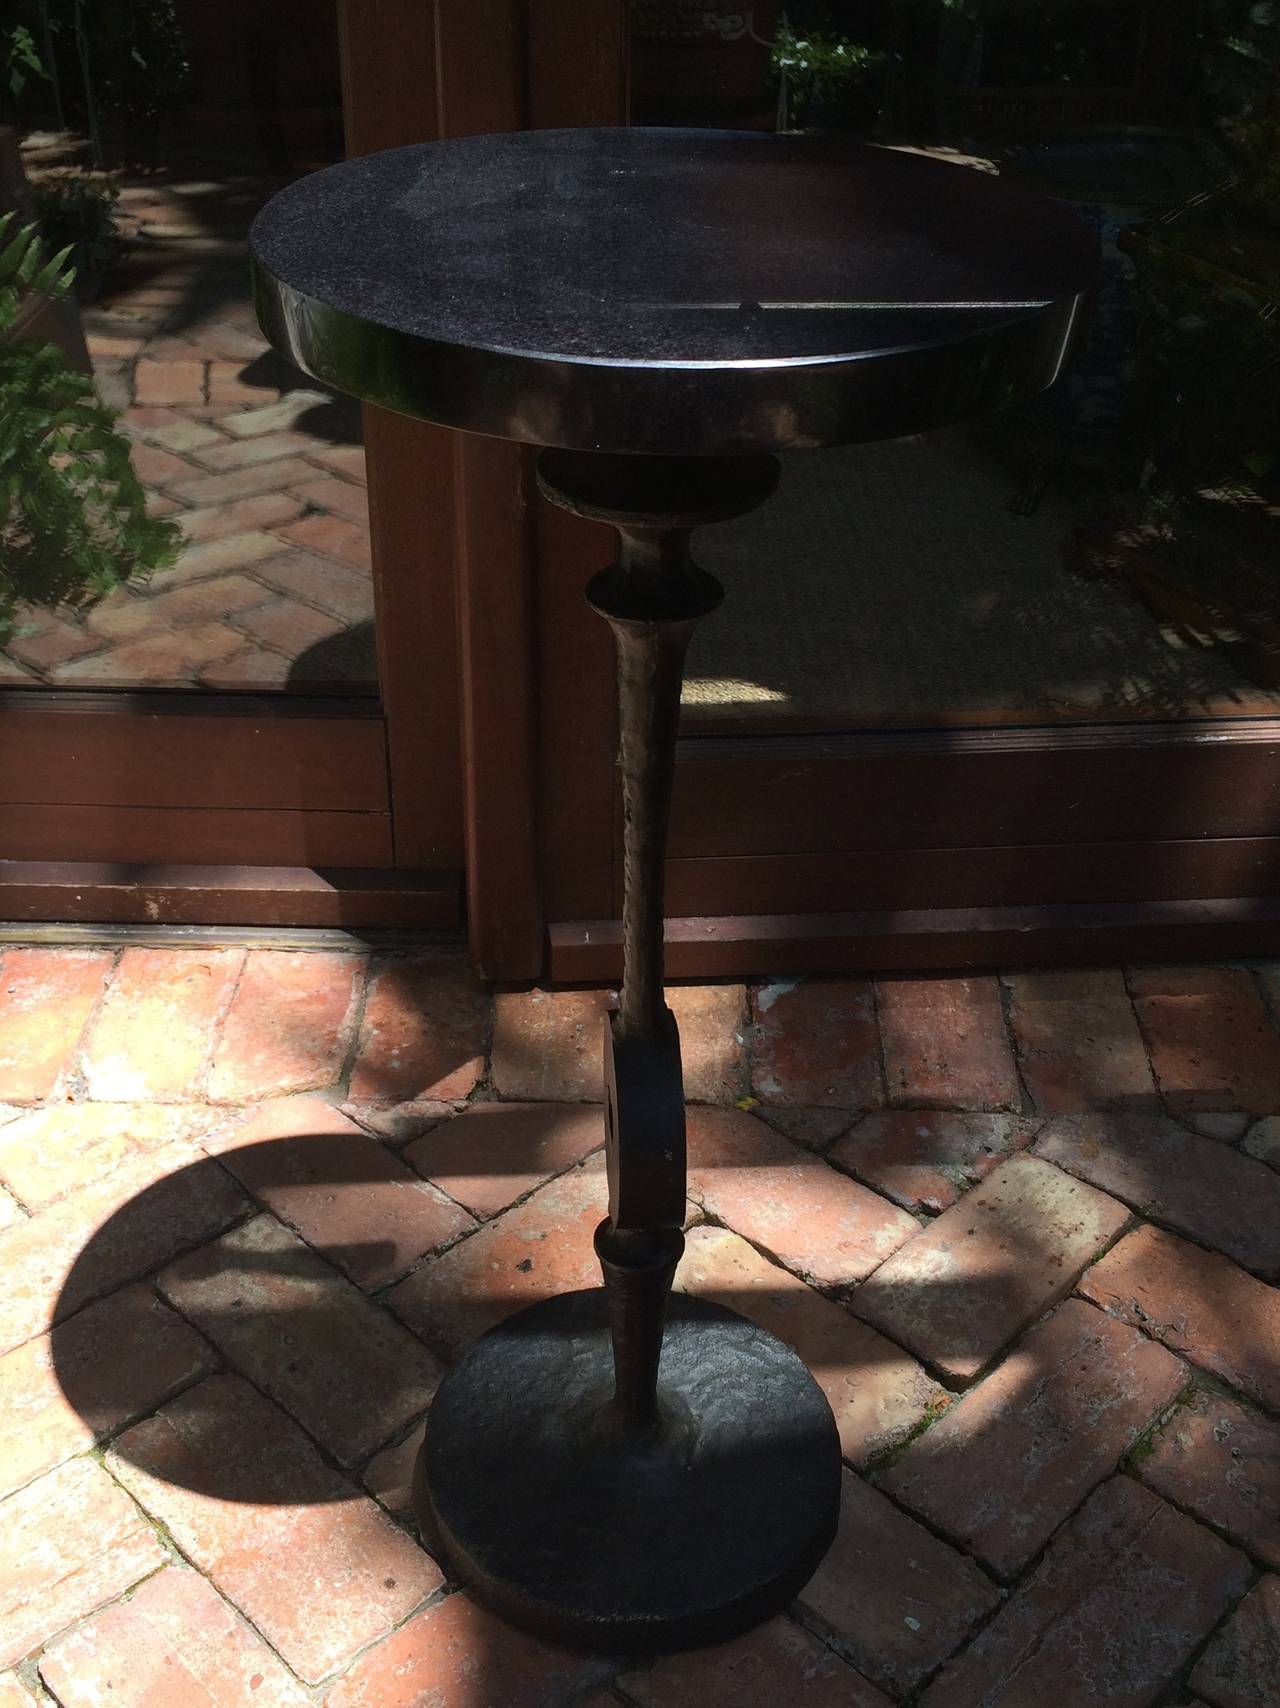 Modern Art Nouveau style side or drinks table, black hammered like metal base with dark marble top.